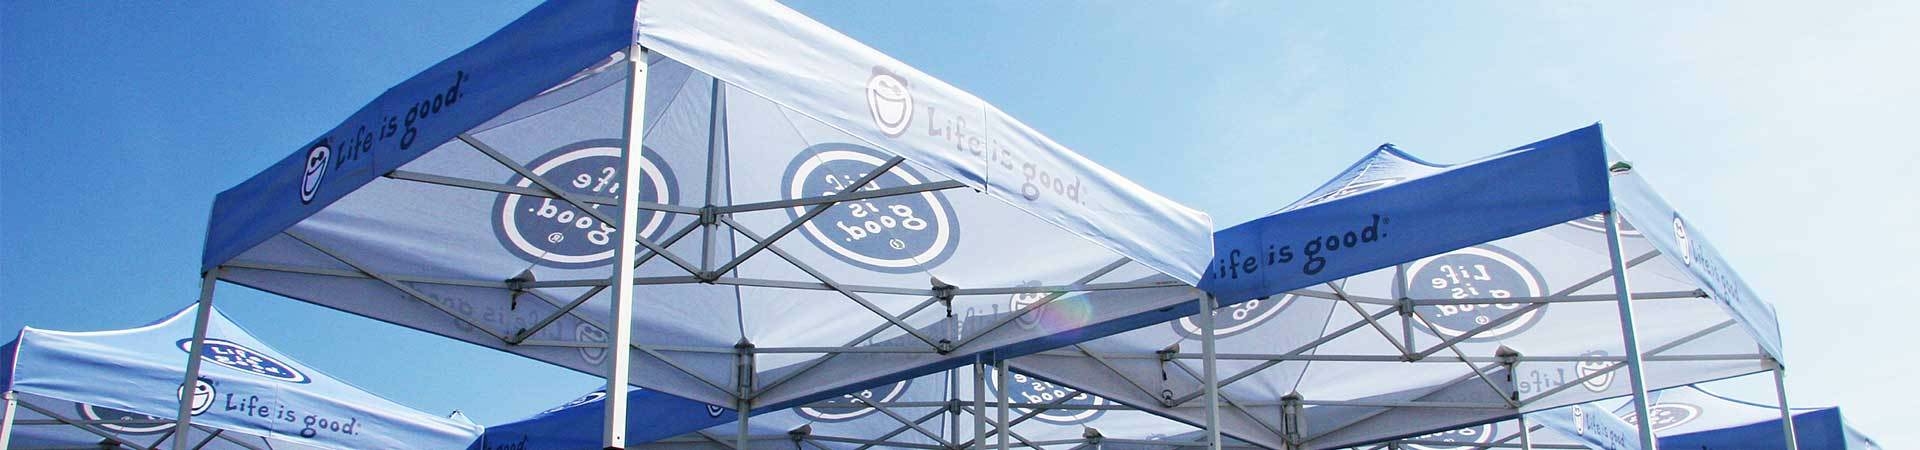 Custom printed tents from the underside at an event.